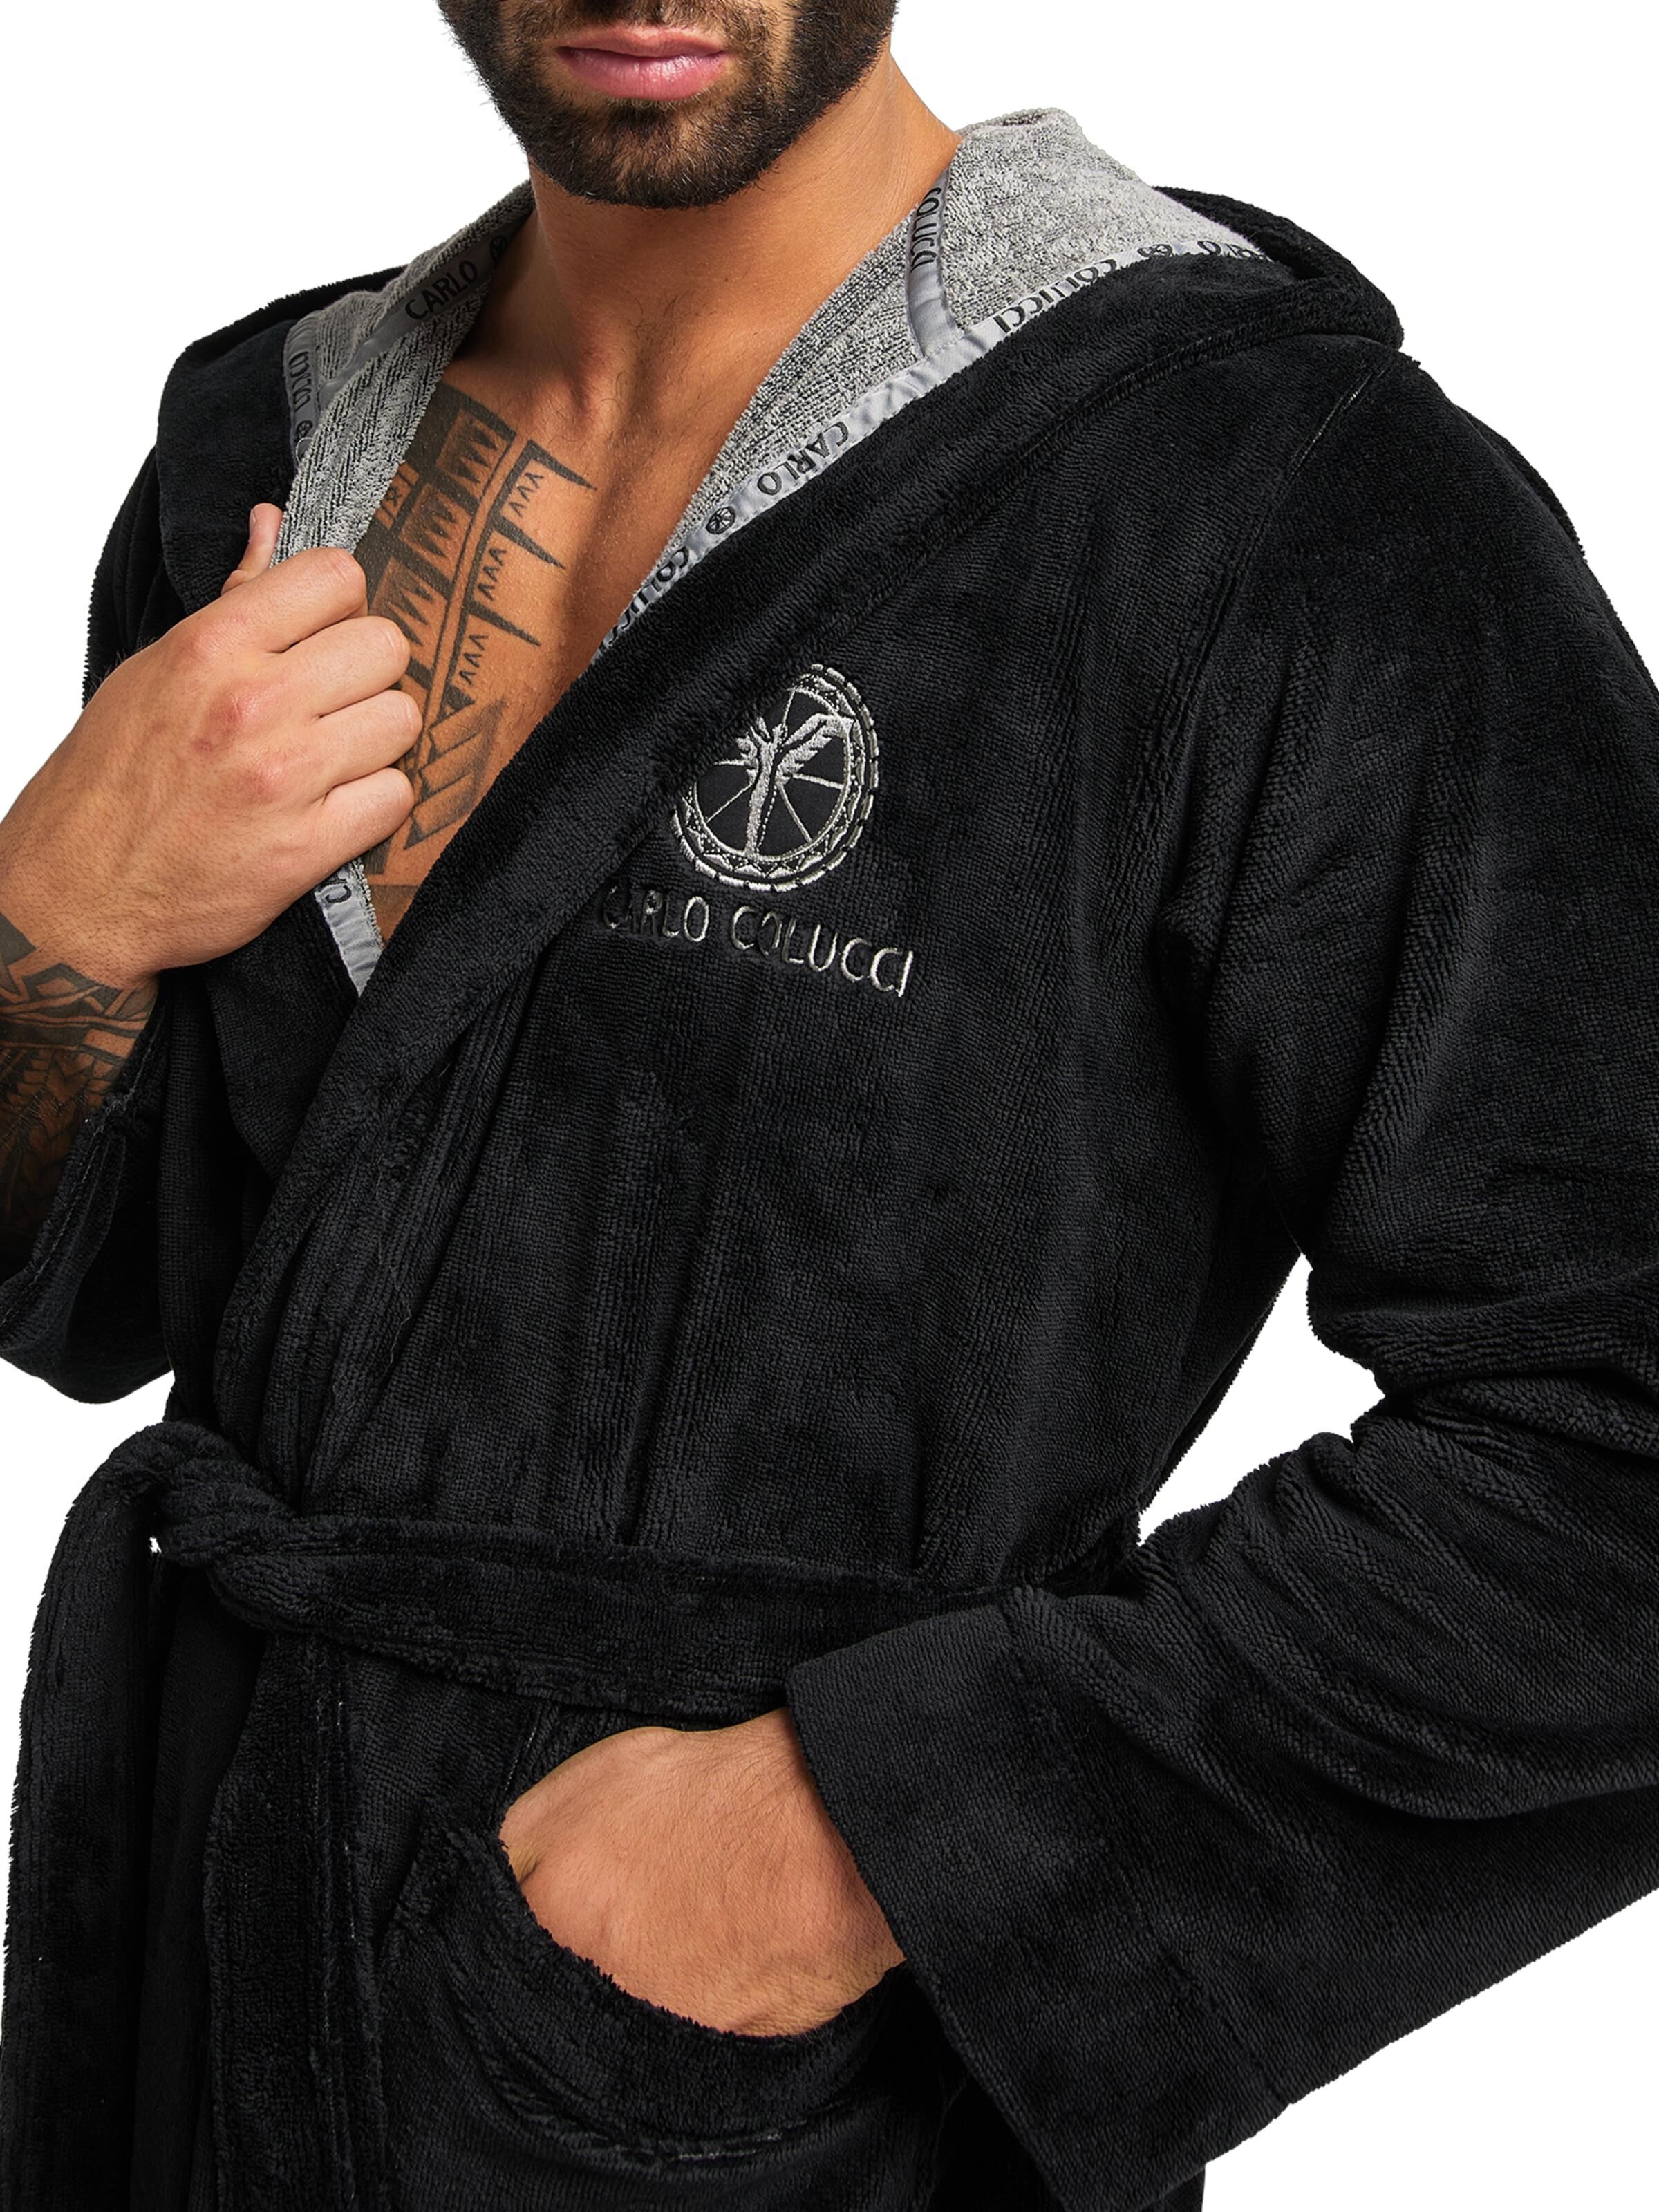 Giant Robes® Black with Maroon Sherpa Lining